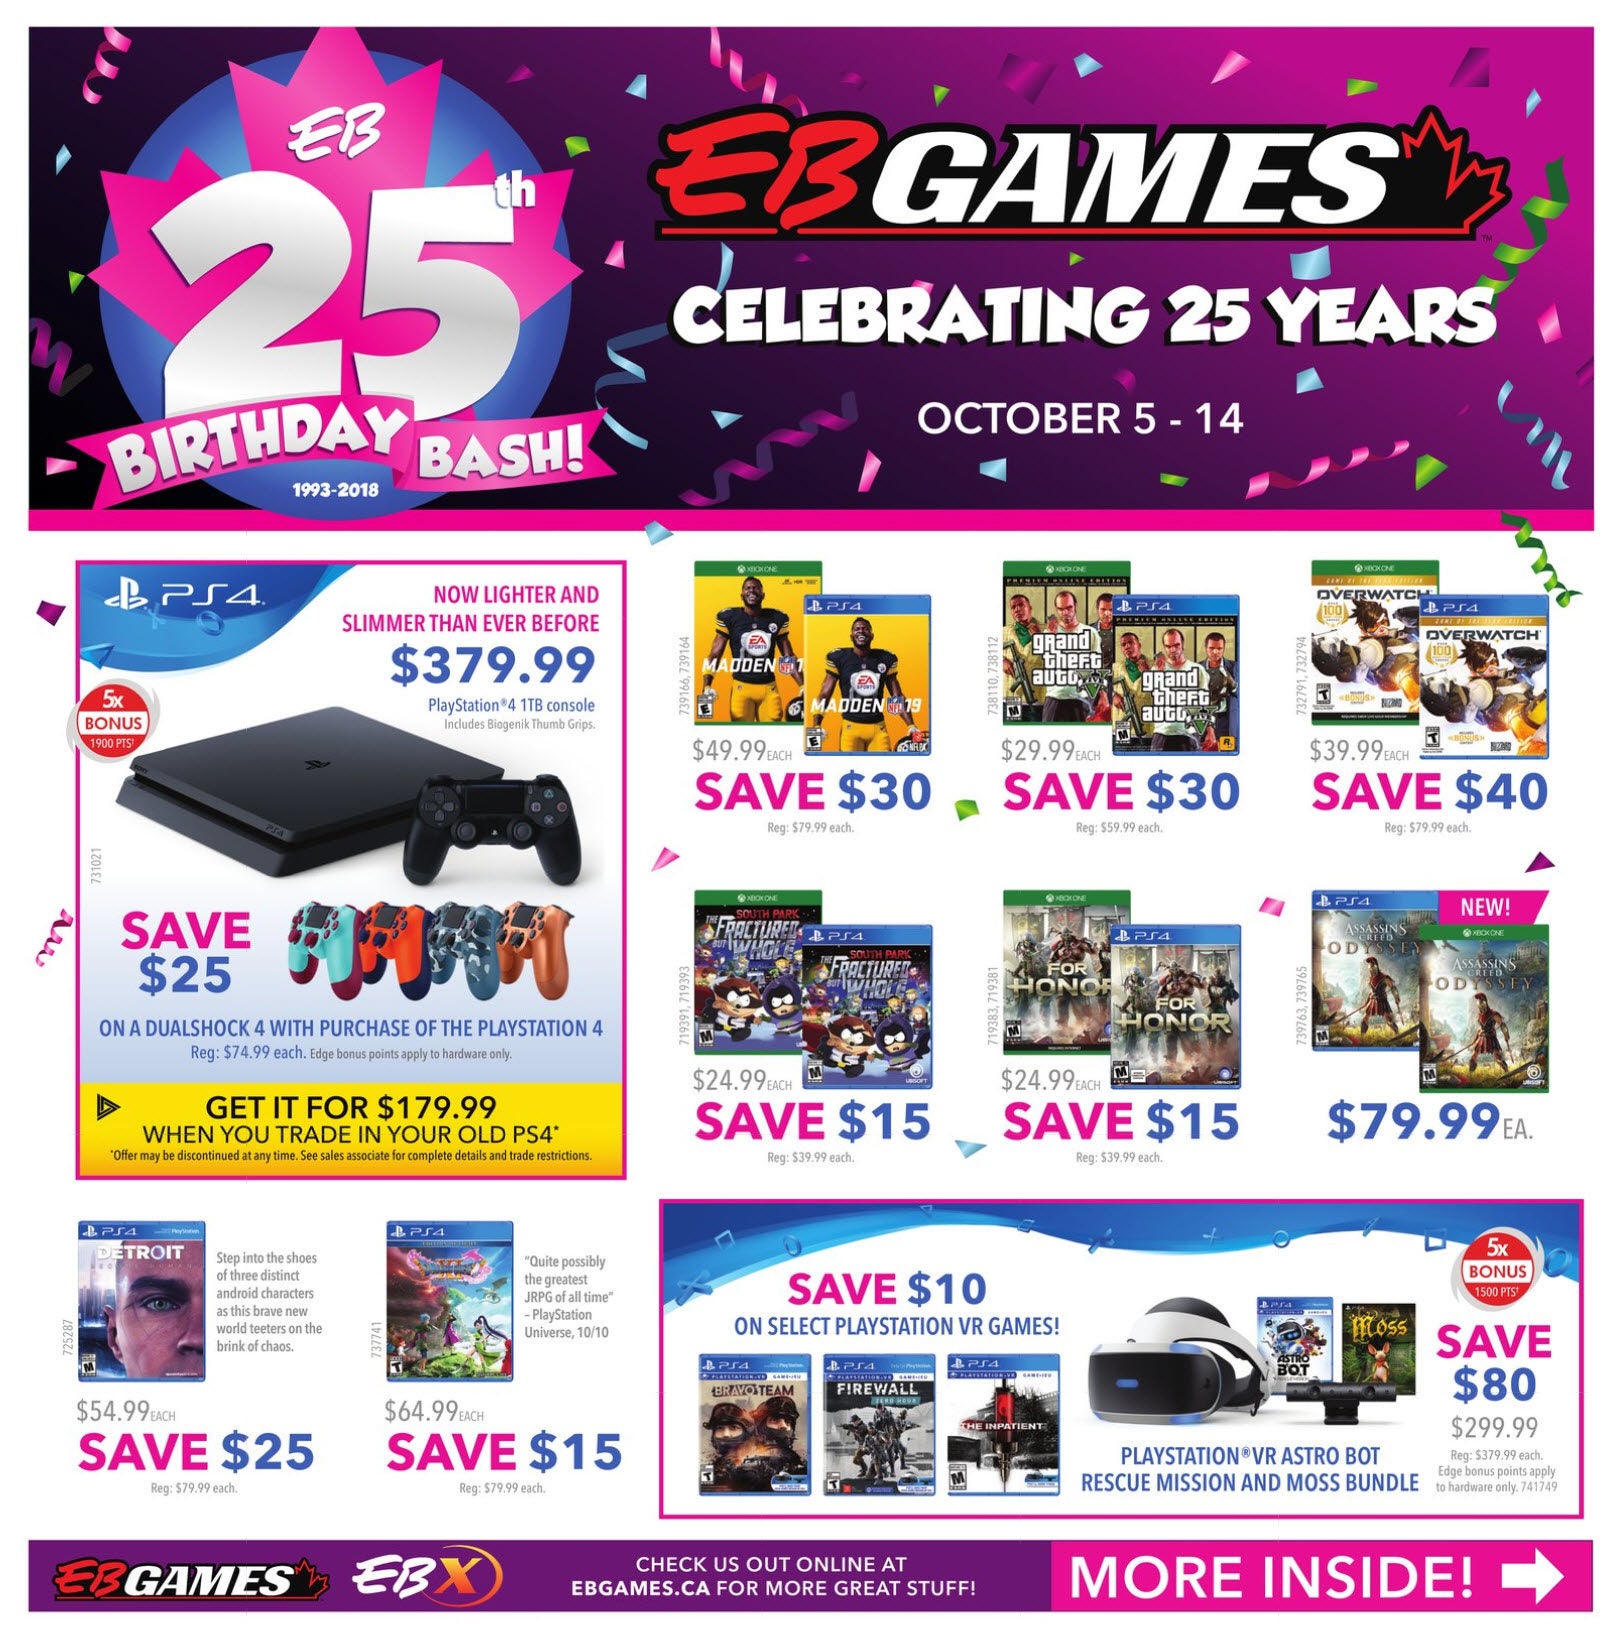 Adventure Time Card Wars Eb Games Cardfssn Org - eb games weekly flyer 25th birthday bash oct 5 14